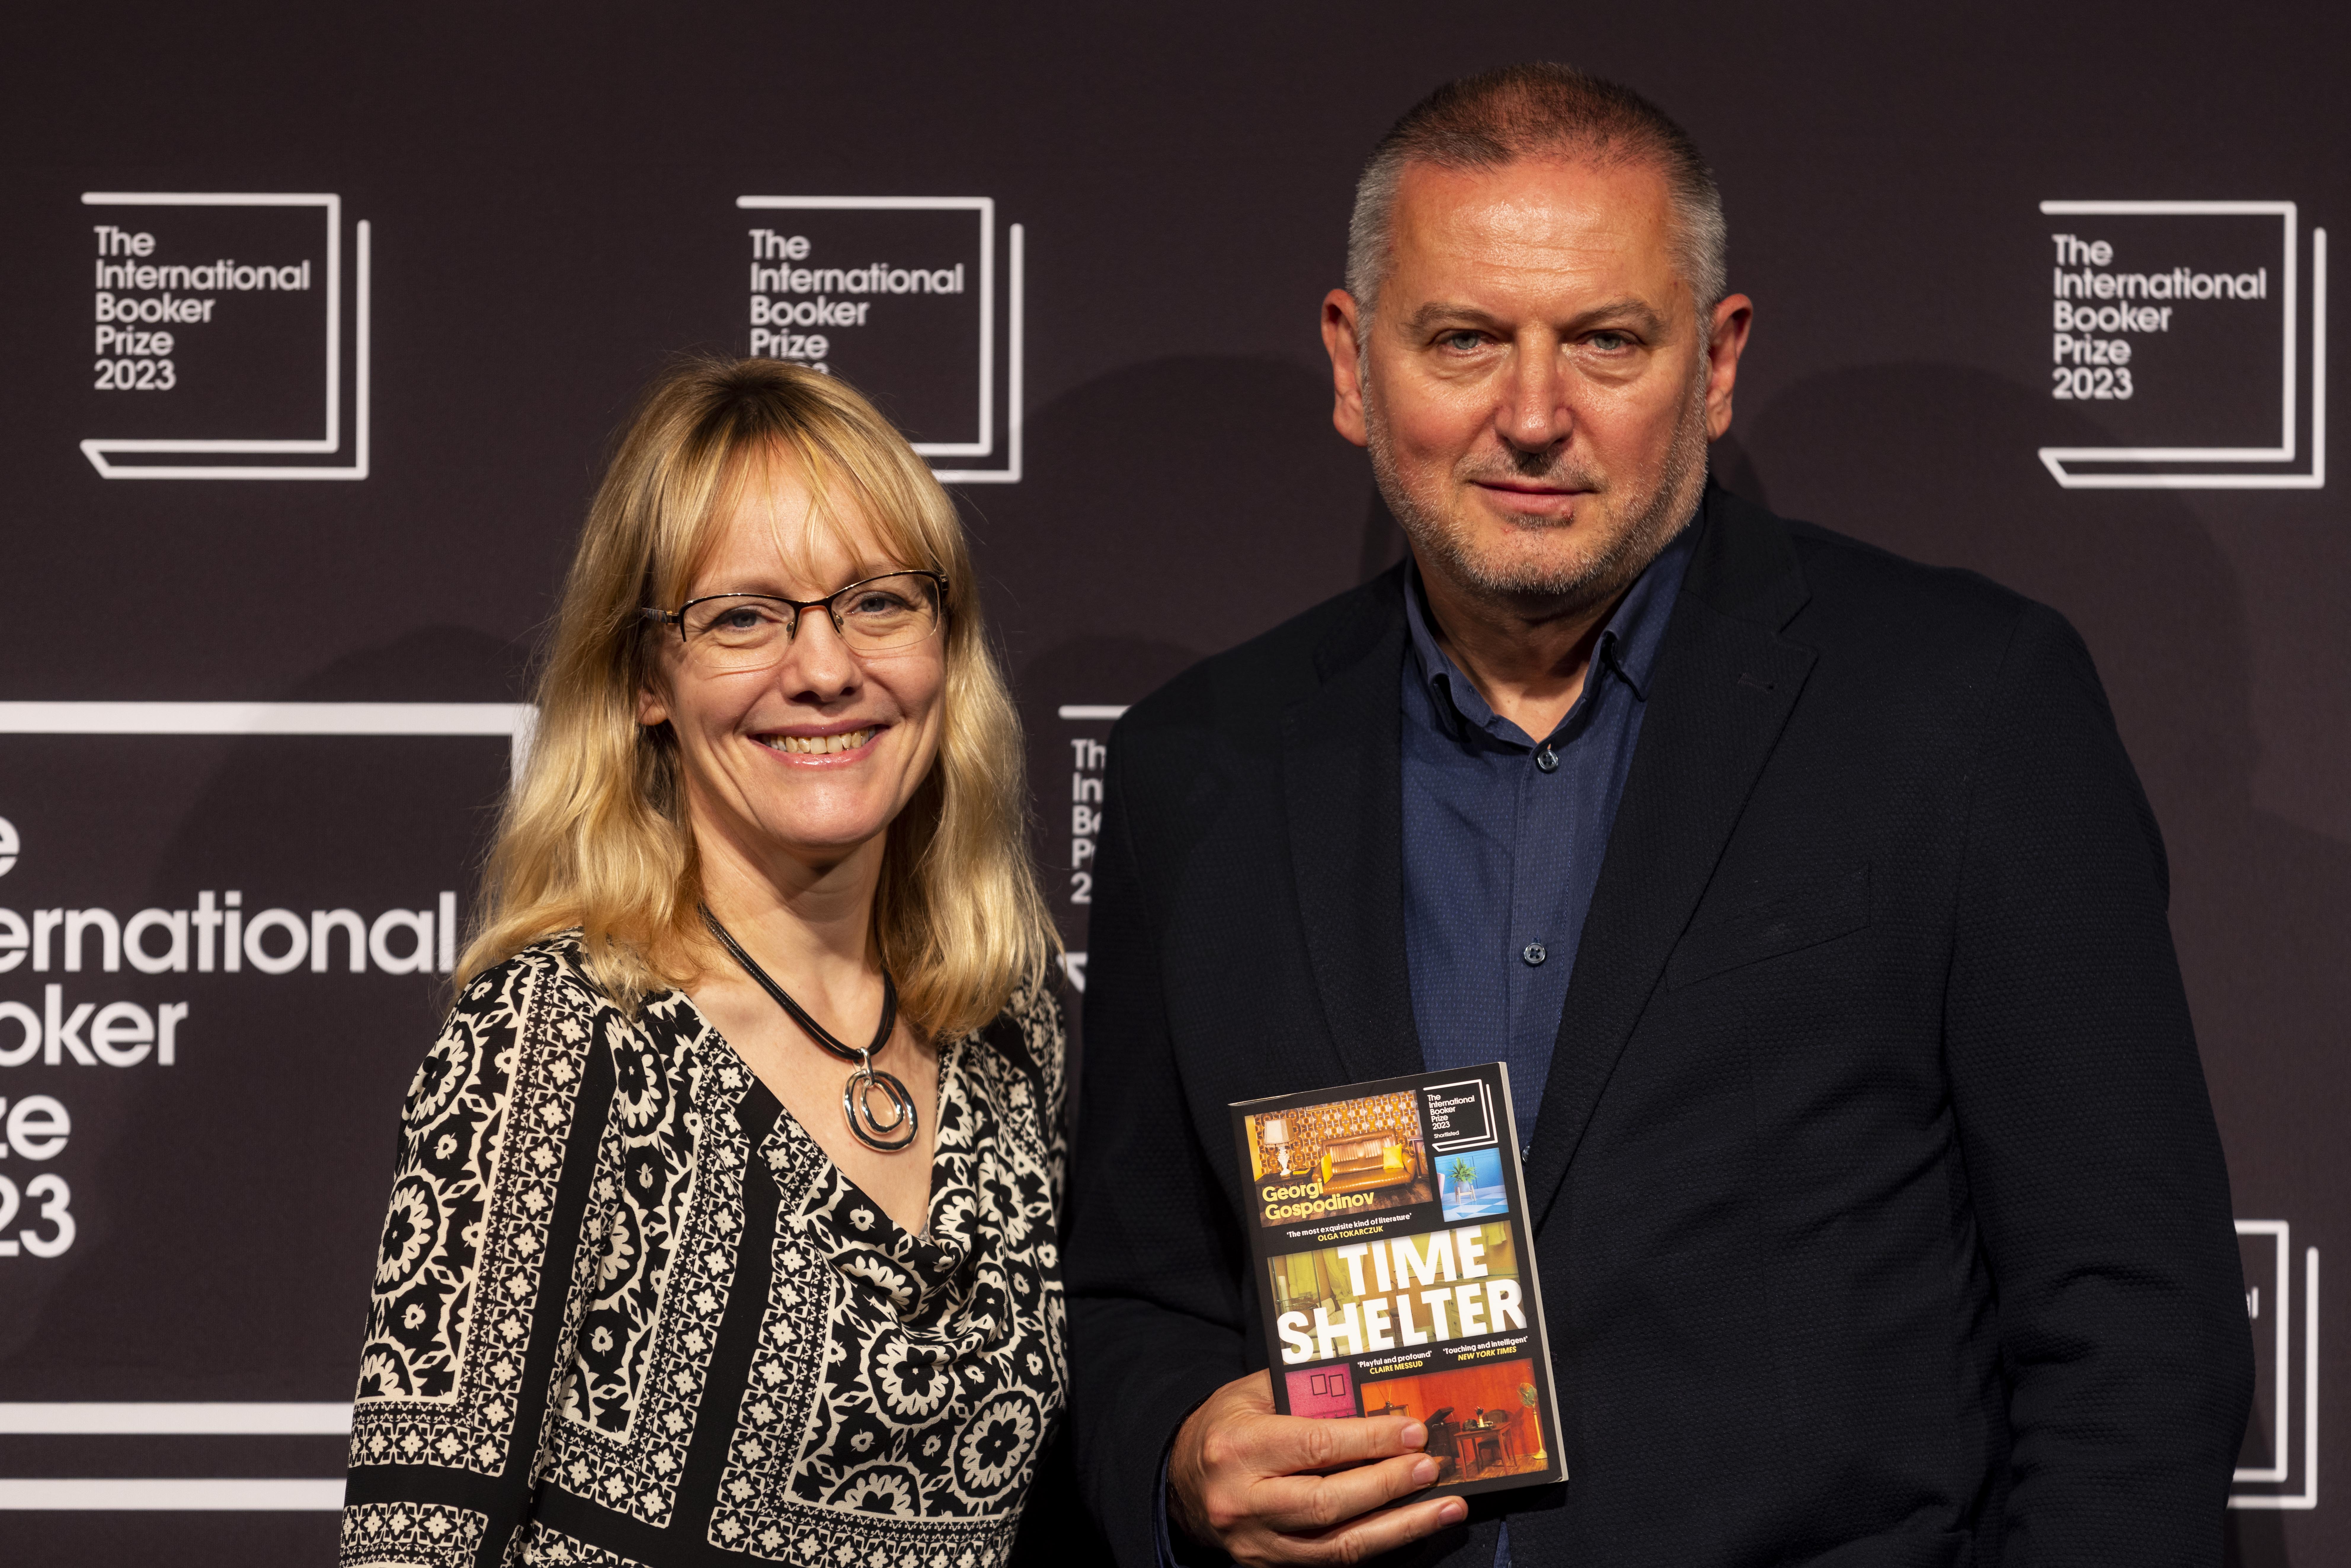 Angela Rodel, translator for 'Time Shelter' and Georgi Gospodinov, author of 'Time Shelter' attend The International Booker Prize 2023 shortlist readings at Southbank Centre ahead of the winners’ ceremony at Sky Garden on May 23, 2023. Image: The Booker Prizes